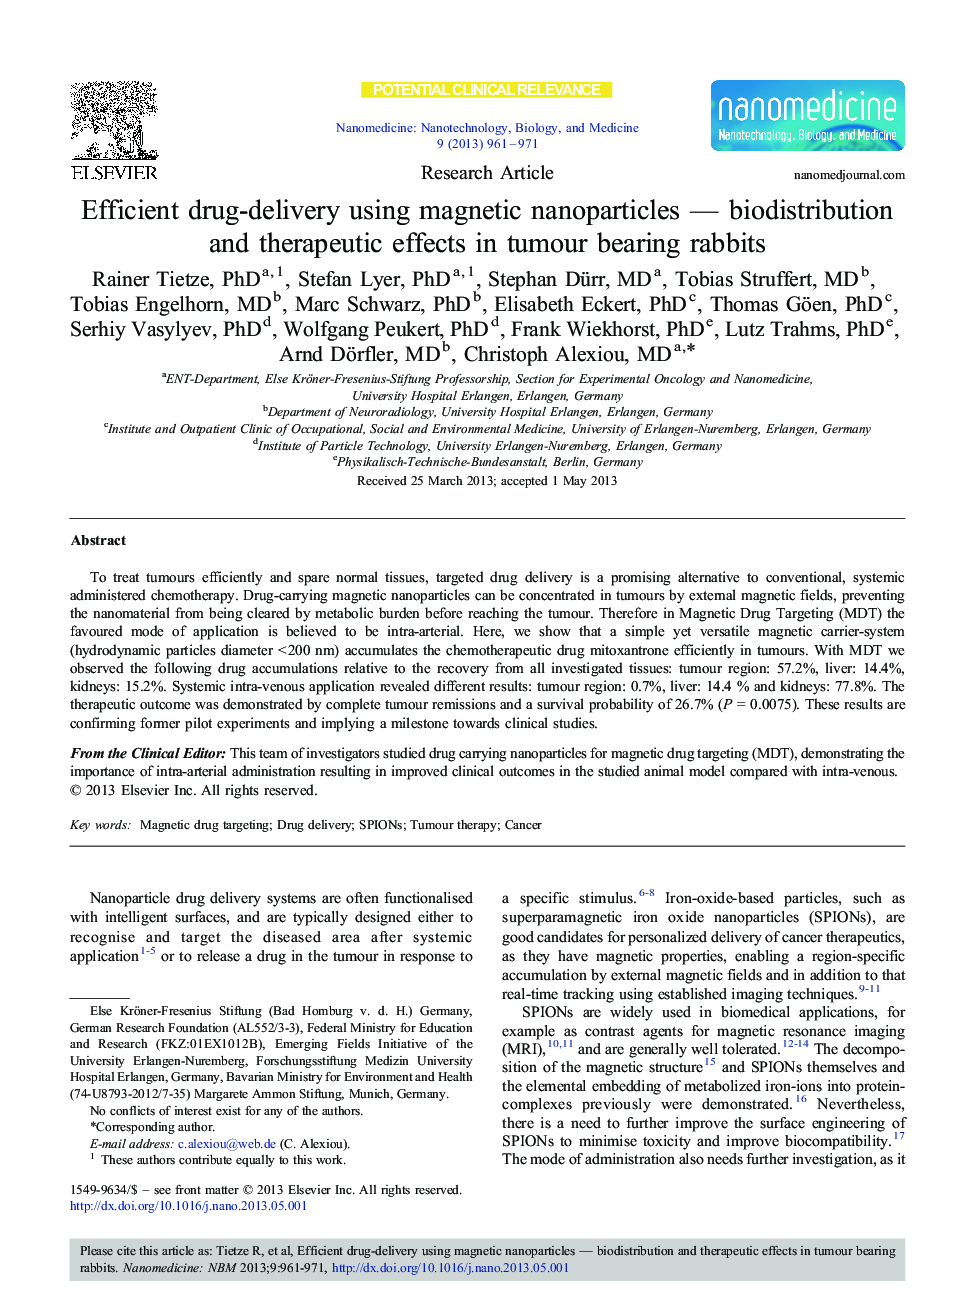 Efficient drug-delivery using magnetic nanoparticles — biodistribution and therapeutic effects in tumour bearing rabbits 